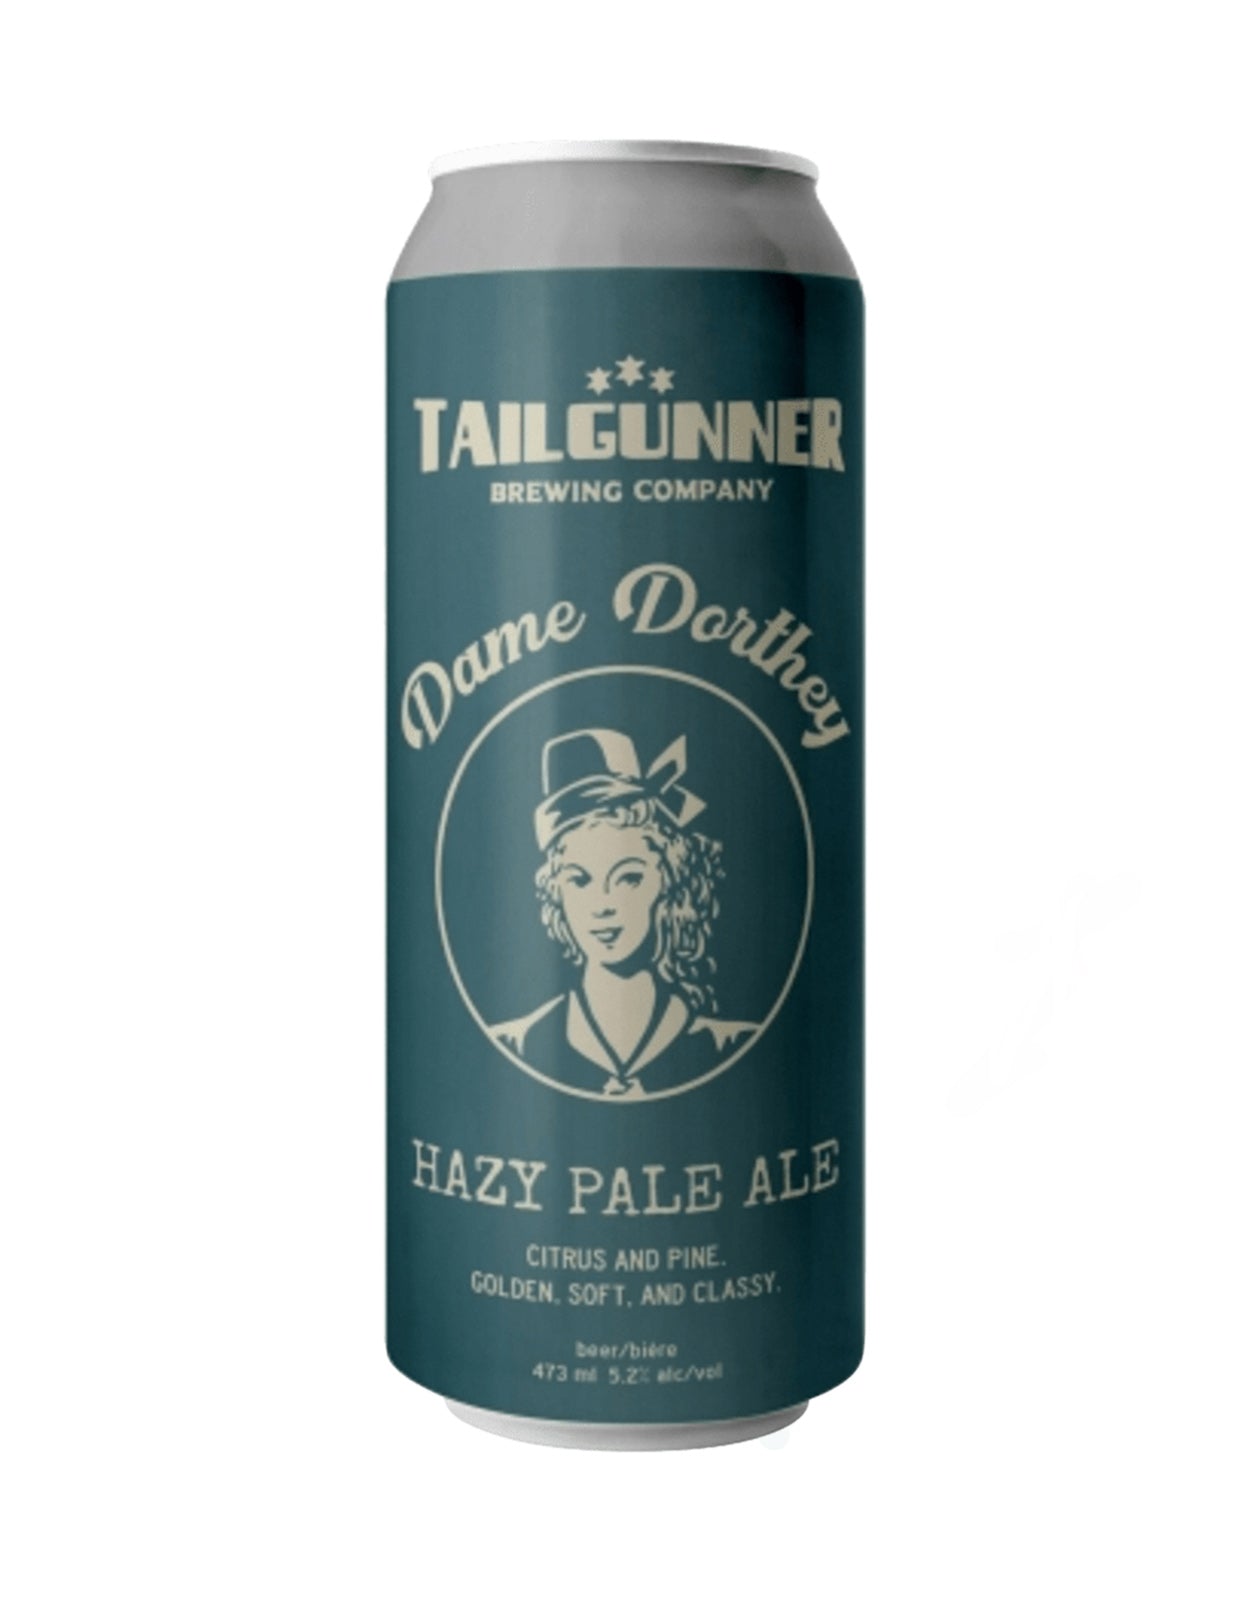 Tailgunner Dame Dorthey Hazy Pale Ale 473 ml - 4 Cans